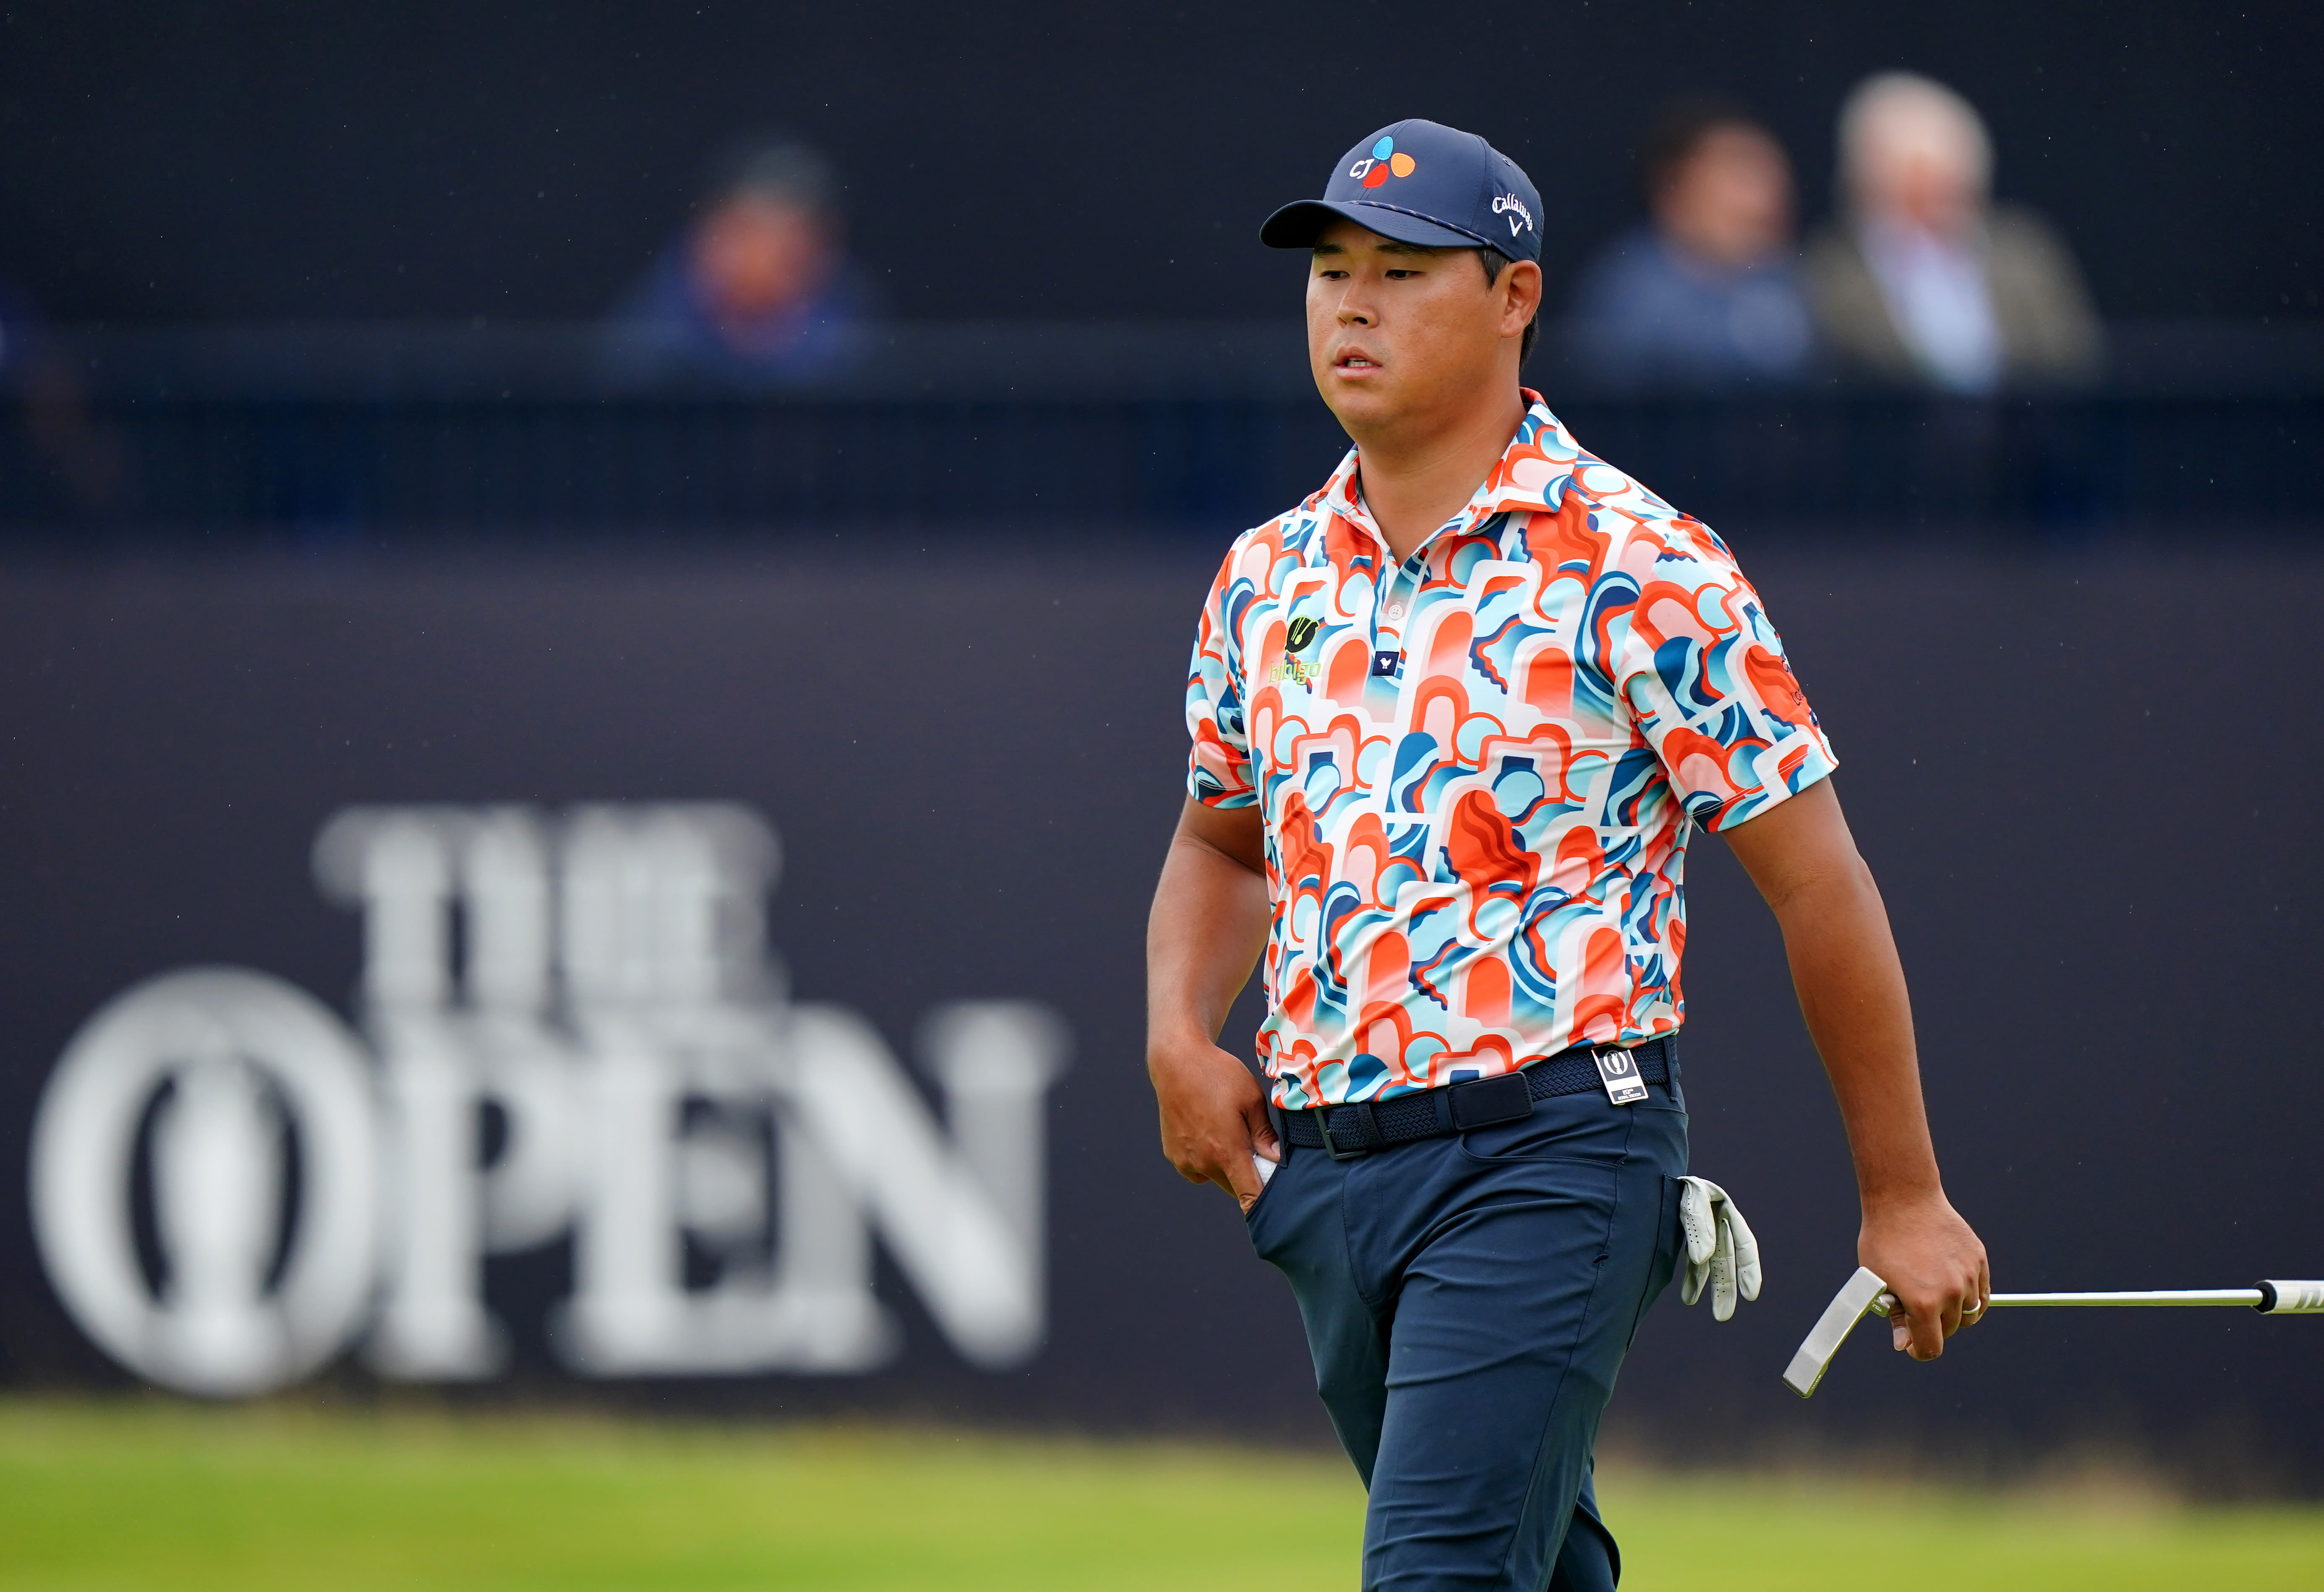 British Open: Si Woo Kim hits long hole-in-one in historic first on No. 17 at Royal Troon